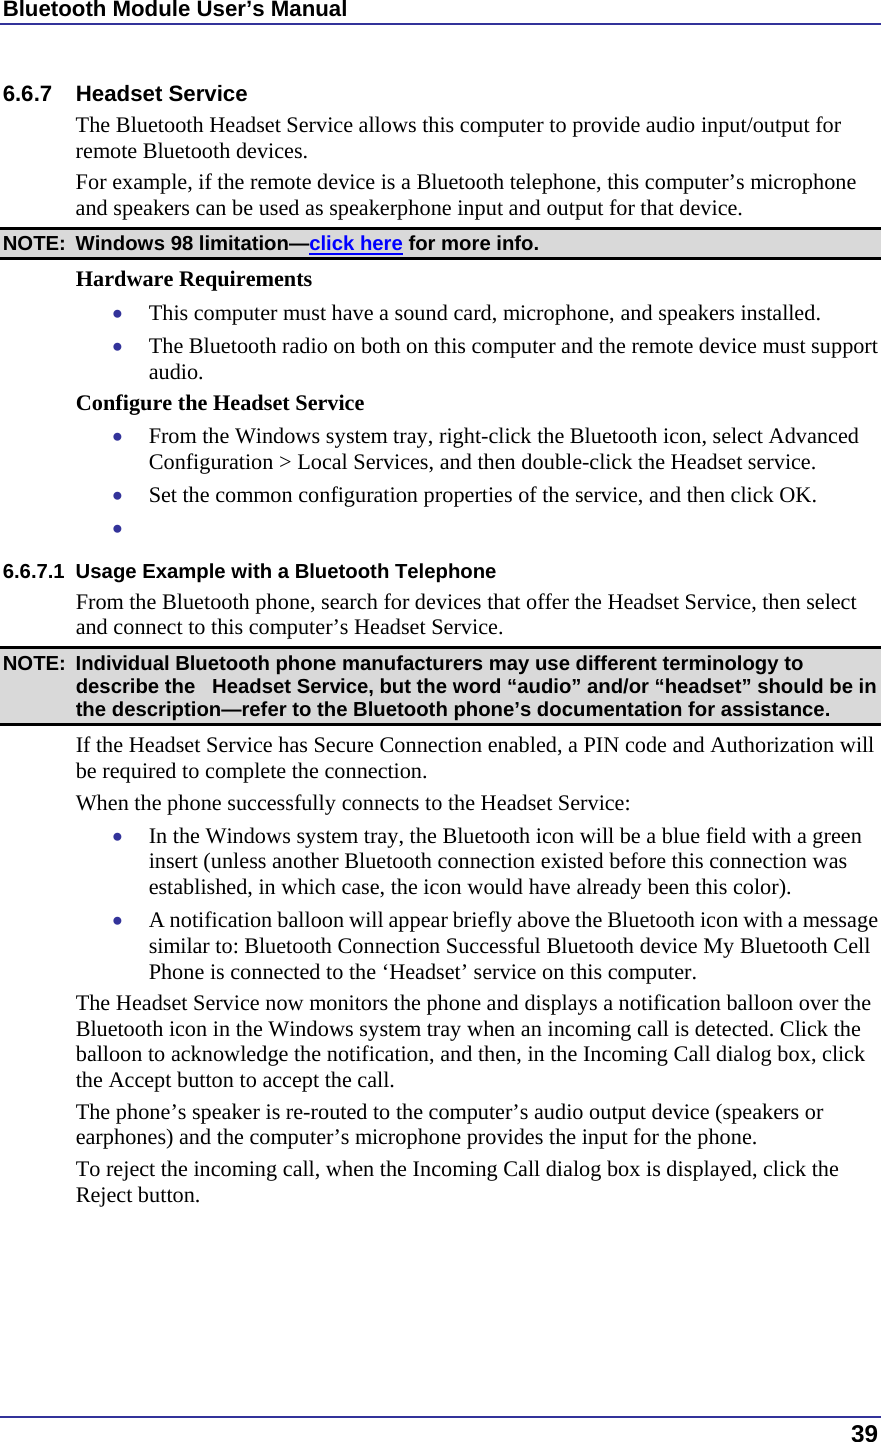 Bluetooth Module User’s Manual  39 6.6.7 Headset Service The Bluetooth Headset Service allows this computer to provide audio input/output for remote Bluetooth devices. For example, if the remote device is a Bluetooth telephone, this computer’s microphone and speakers can be used as speakerphone input and output for that device. NOTE:  Windows 98 limitation—click here for more info. Hardware Requirements •  This computer must have a sound card, microphone, and speakers installed. •  The Bluetooth radio on both on this computer and the remote device must support audio. Configure the Headset Service •  From the Windows system tray, right-click the Bluetooth icon, select Advanced Configuration &gt; Local Services, and then double-click the Headset service. •  Set the common configuration properties of the service, and then click OK. •   6.6.7.1  Usage Example with a Bluetooth Telephone From the Bluetooth phone, search for devices that offer the Headset Service, then select and connect to this computer’s Headset Service. NOTE:  Individual Bluetooth phone manufacturers may use different terminology to describe the   Headset Service, but the word “audio” and/or “headset” should be in the description—refer to the Bluetooth phone’s documentation for assistance. If the Headset Service has Secure Connection enabled, a PIN code and Authorization will be required to complete the connection. When the phone successfully connects to the Headset Service: •  In the Windows system tray, the Bluetooth icon will be a blue field with a green insert (unless another Bluetooth connection existed before this connection was established, in which case, the icon would have already been this color). •  A notification balloon will appear briefly above the Bluetooth icon with a message similar to: Bluetooth Connection Successful Bluetooth device My Bluetooth Cell Phone is connected to the ‘Headset’ service on this computer. The Headset Service now monitors the phone and displays a notification balloon over the Bluetooth icon in the Windows system tray when an incoming call is detected. Click the balloon to acknowledge the notification, and then, in the Incoming Call dialog box, click the Accept button to accept the call. The phone’s speaker is re-routed to the computer’s audio output device (speakers or earphones) and the computer’s microphone provides the input for the phone. To reject the incoming call, when the Incoming Call dialog box is displayed, click the Reject button. 